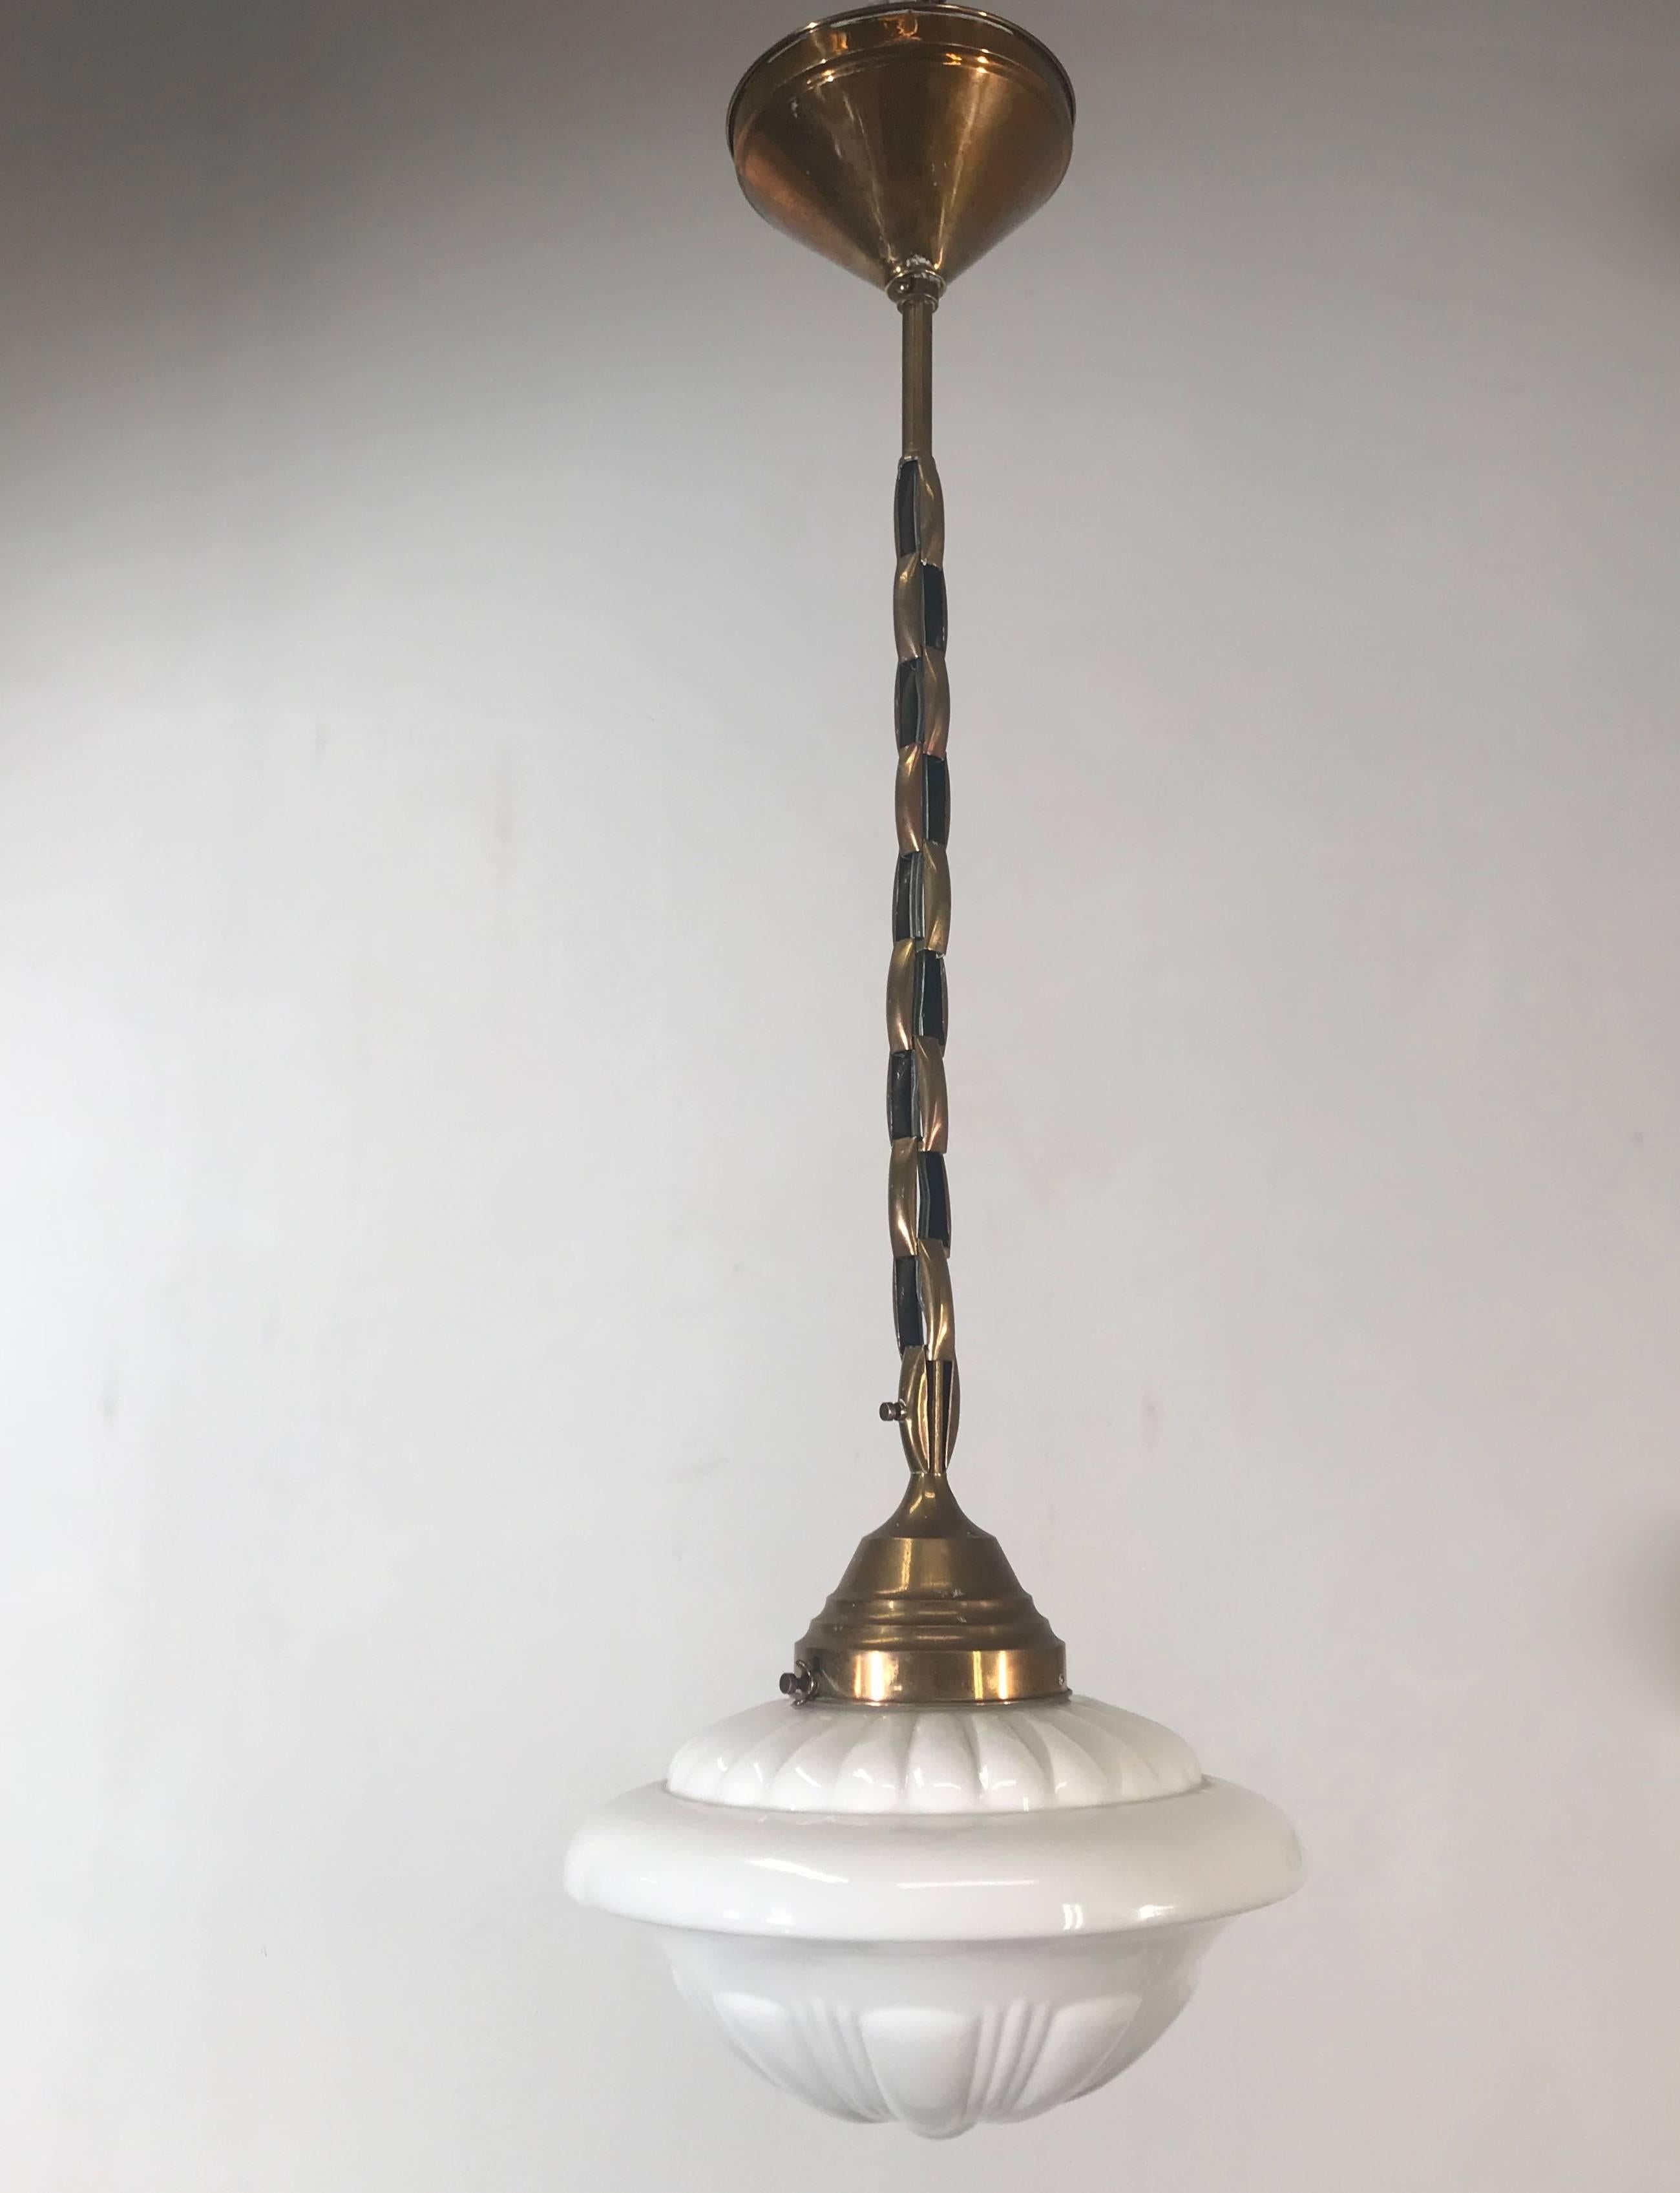 Early 1900s Rare Art Deco Pendant / Light Fixture with Glass Shade & Brass Chain 5